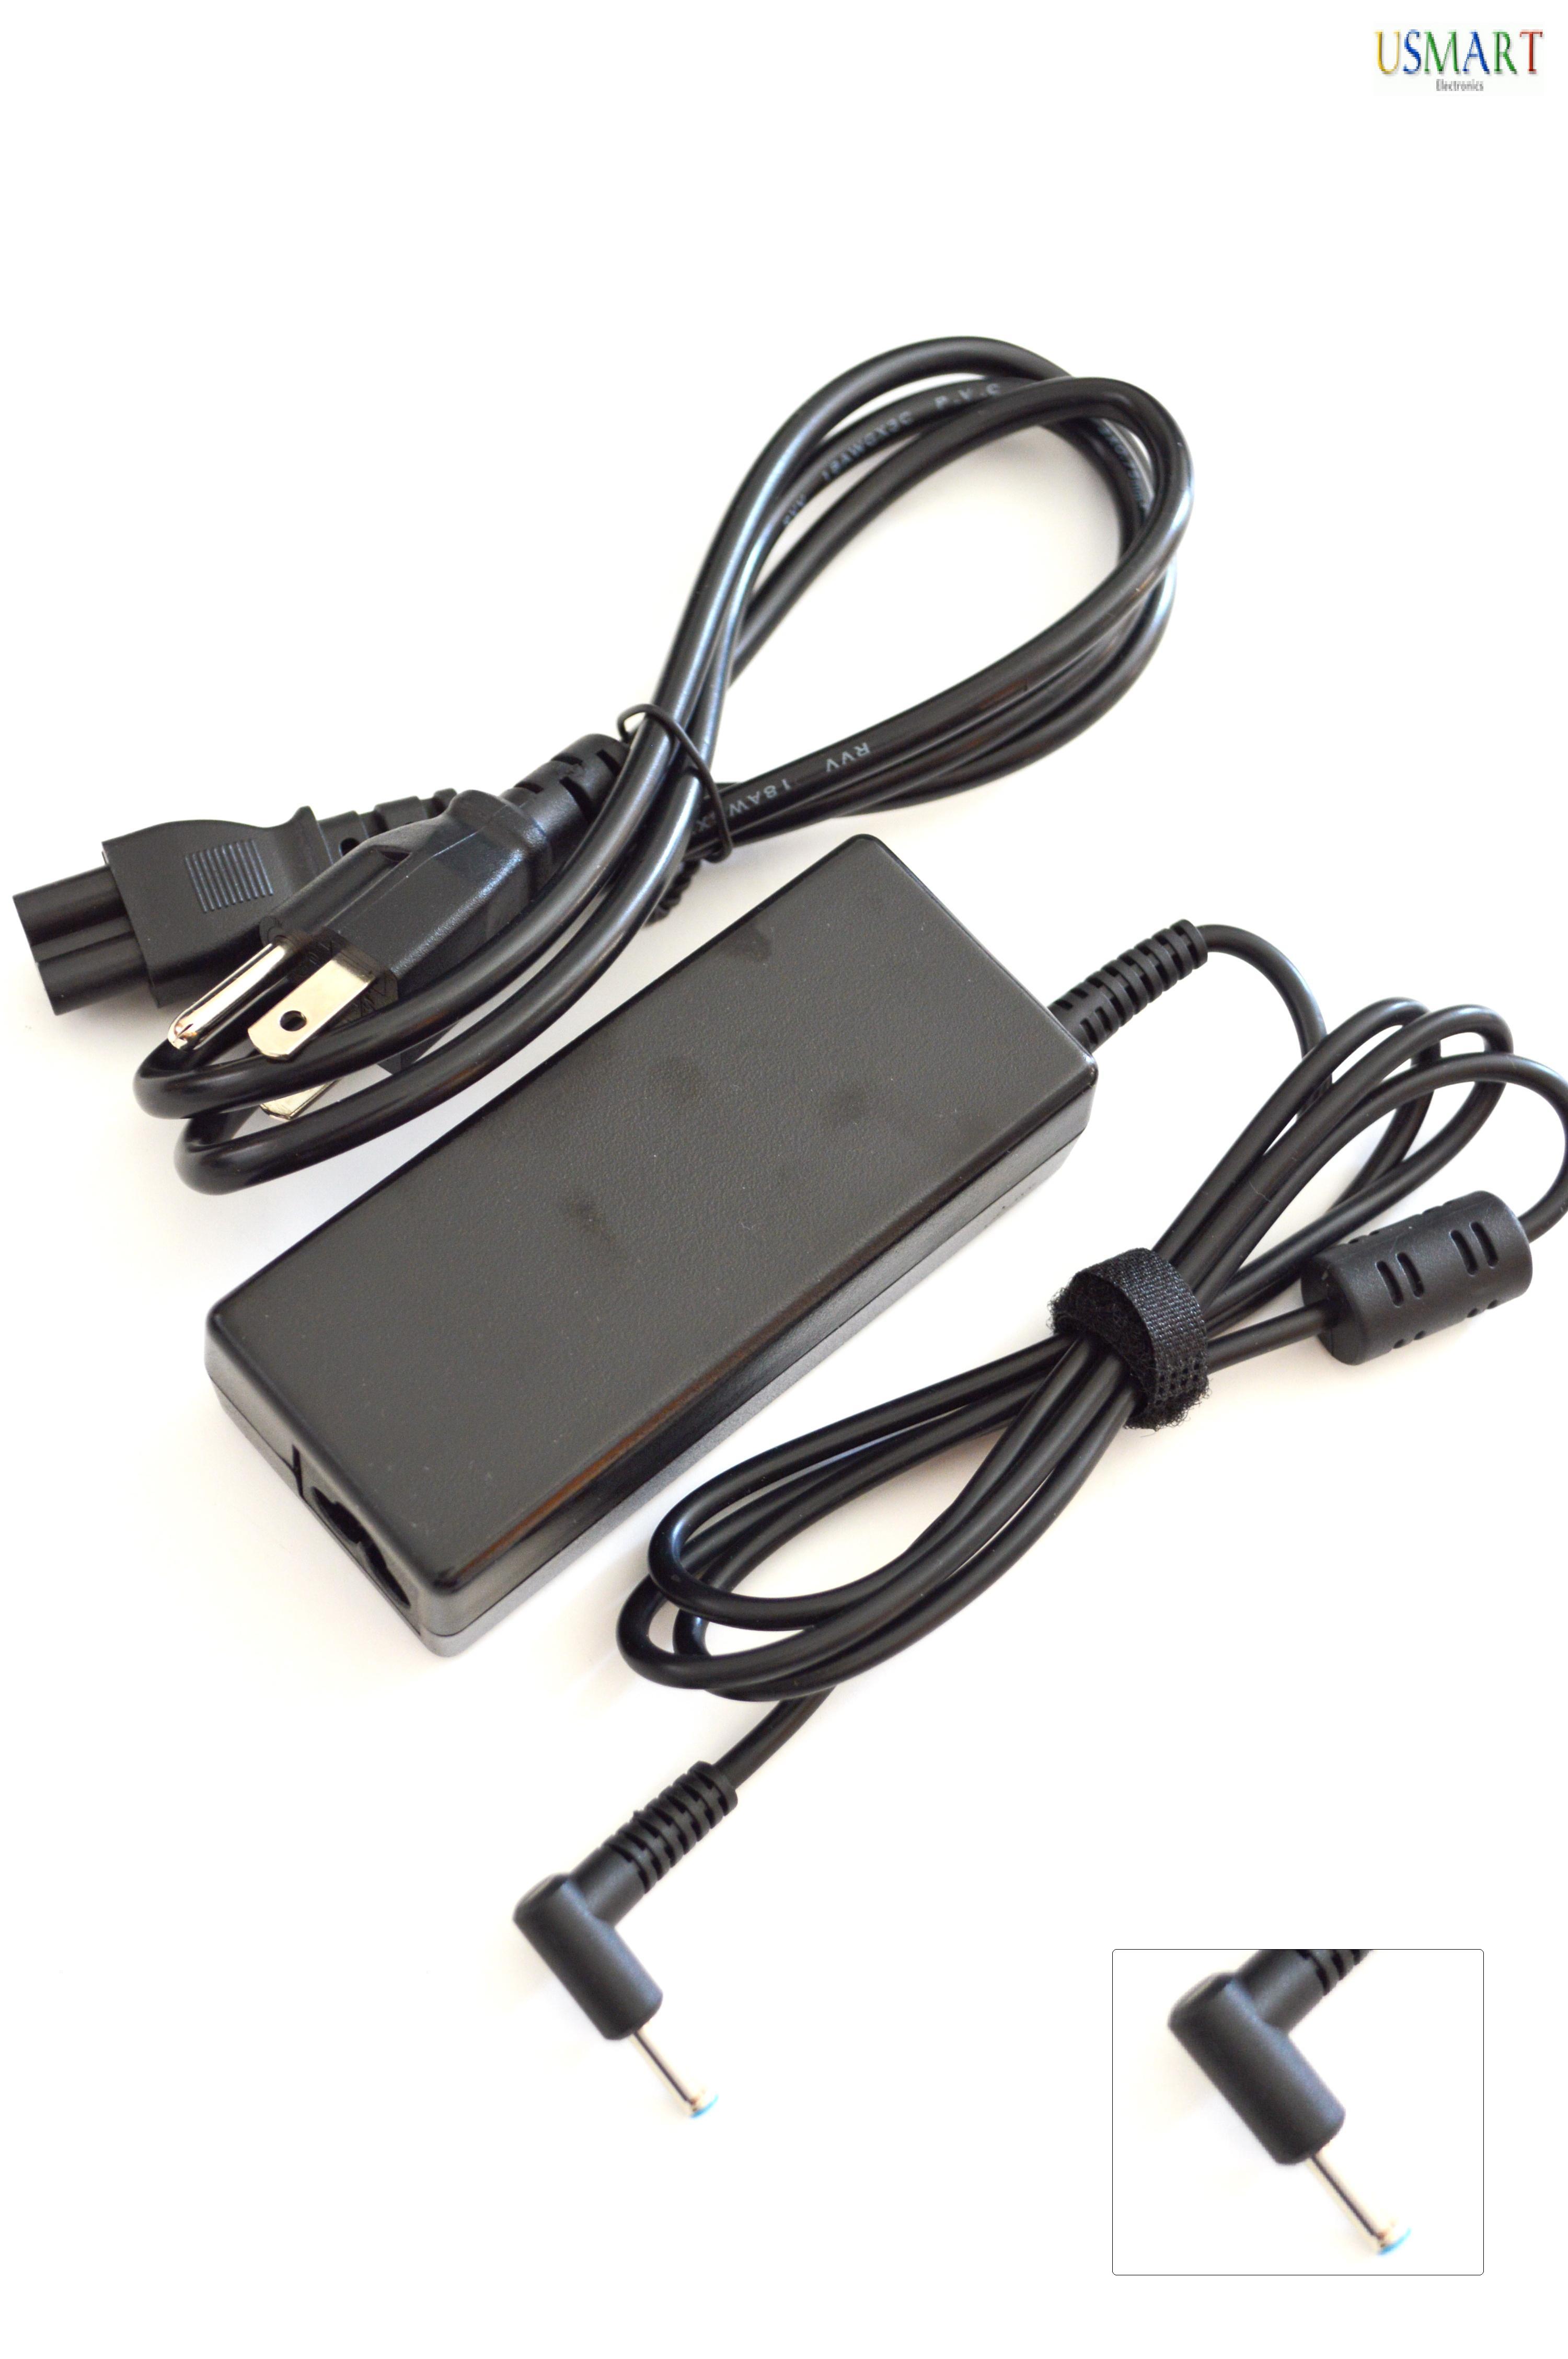 NEW Laptop Charger AC Adapter Power Supply For HP Split 13-m210dx x2 Laptop PC Notebook Chromebook Tablets Power Supply Cord - image 1 of 3